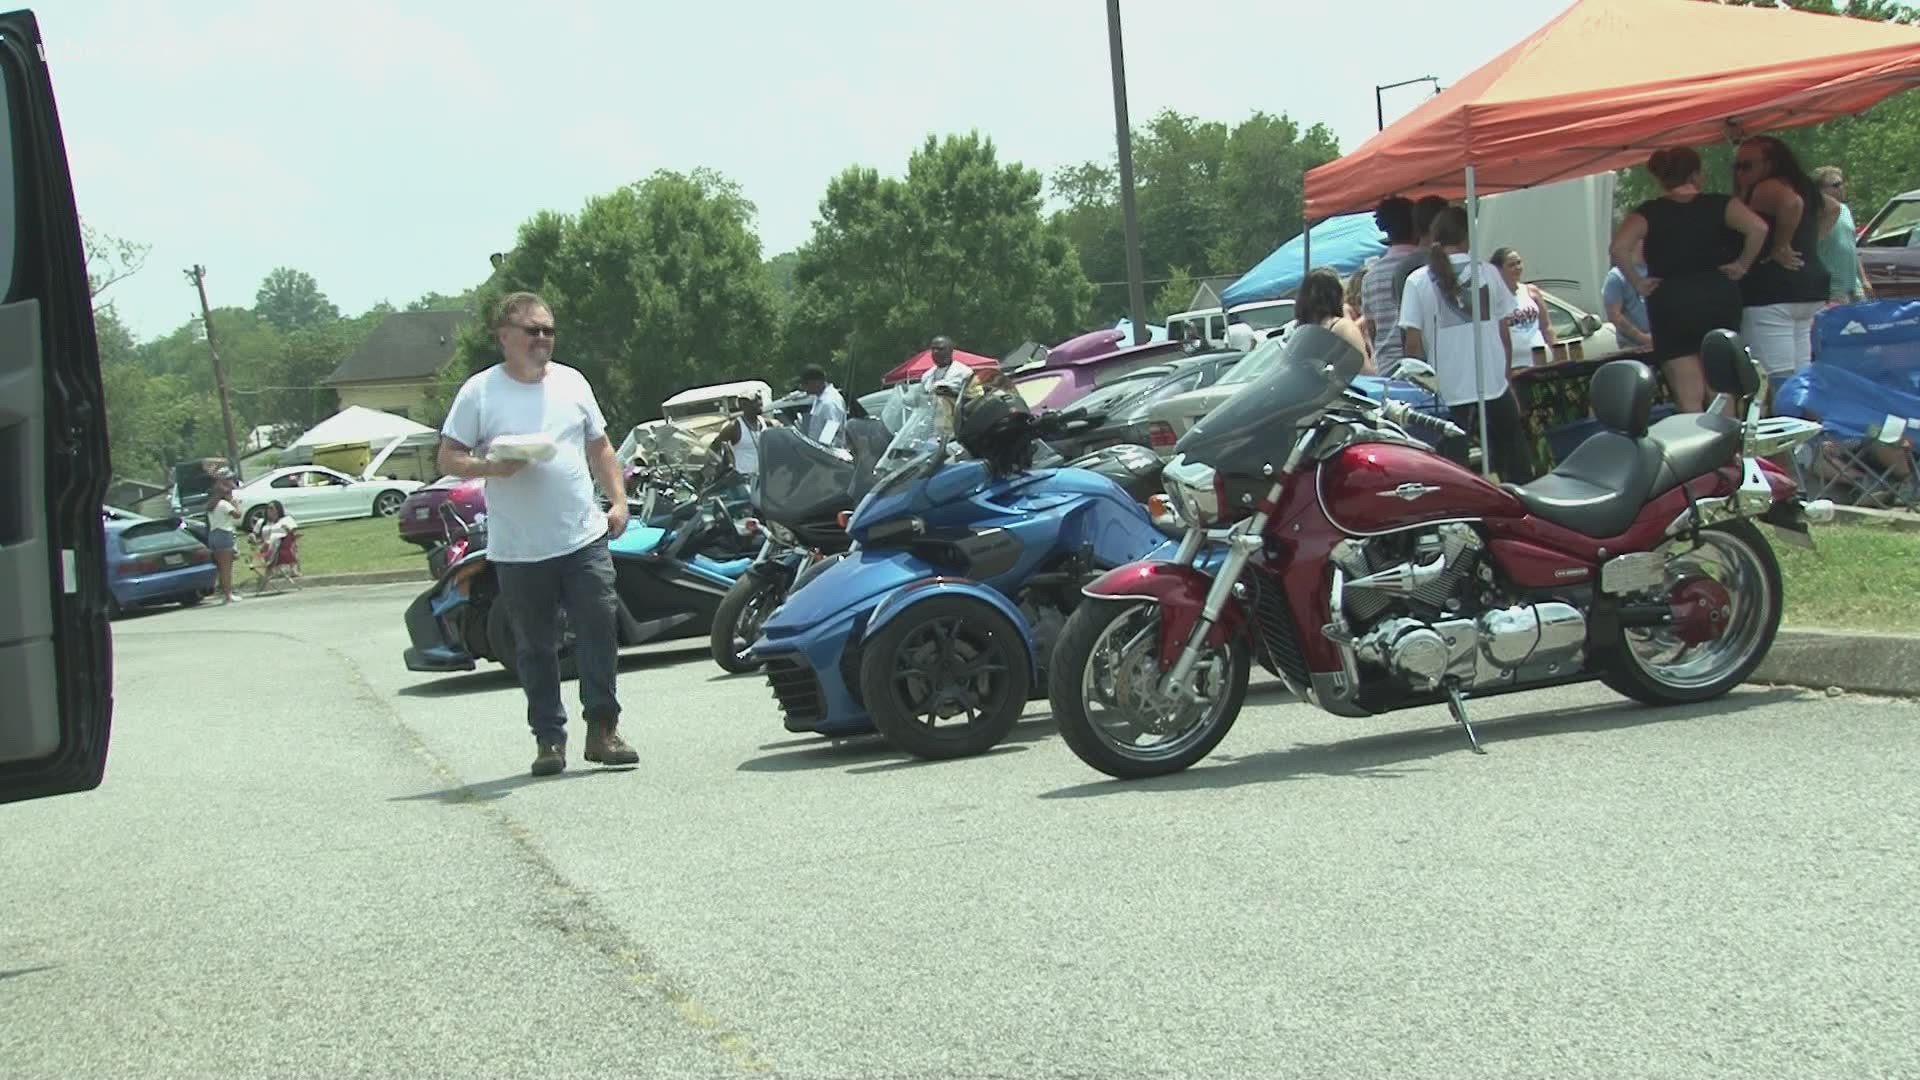 People from across the city came together for the 14th annual Street Dreams Car and Bike Show. It was an effort to bring people together and away from crime.